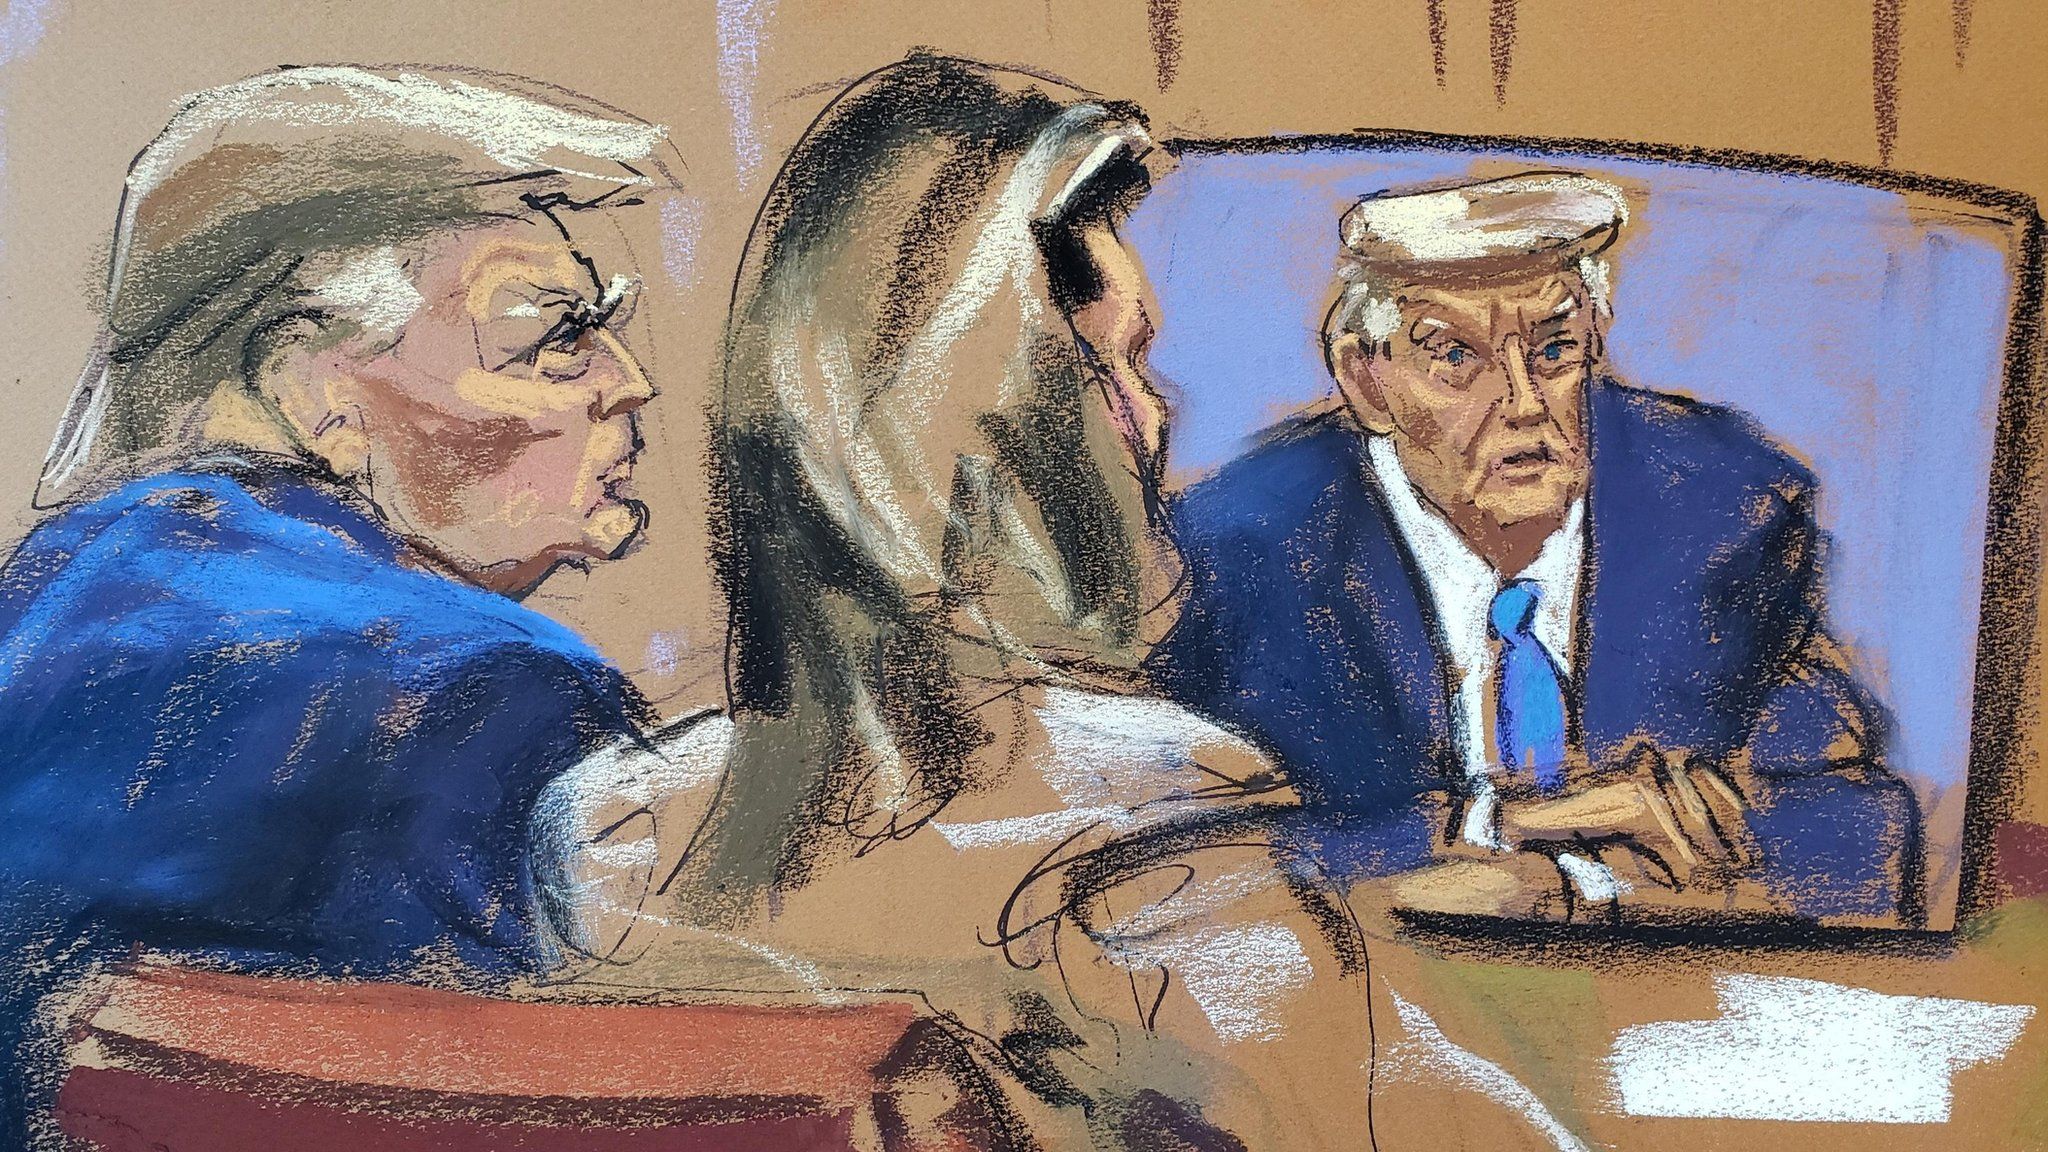 Former U.S. President Donald Trump watches footage of himself giving a video deposition during the second civil trial where Carroll accused former U.S. President Donald Trump of raping her decades ago, at Manhattan Federal Court in New York City, U.S., January 25, 2024 in this courtroom sketch. REUTERS/Jane Rosenberg